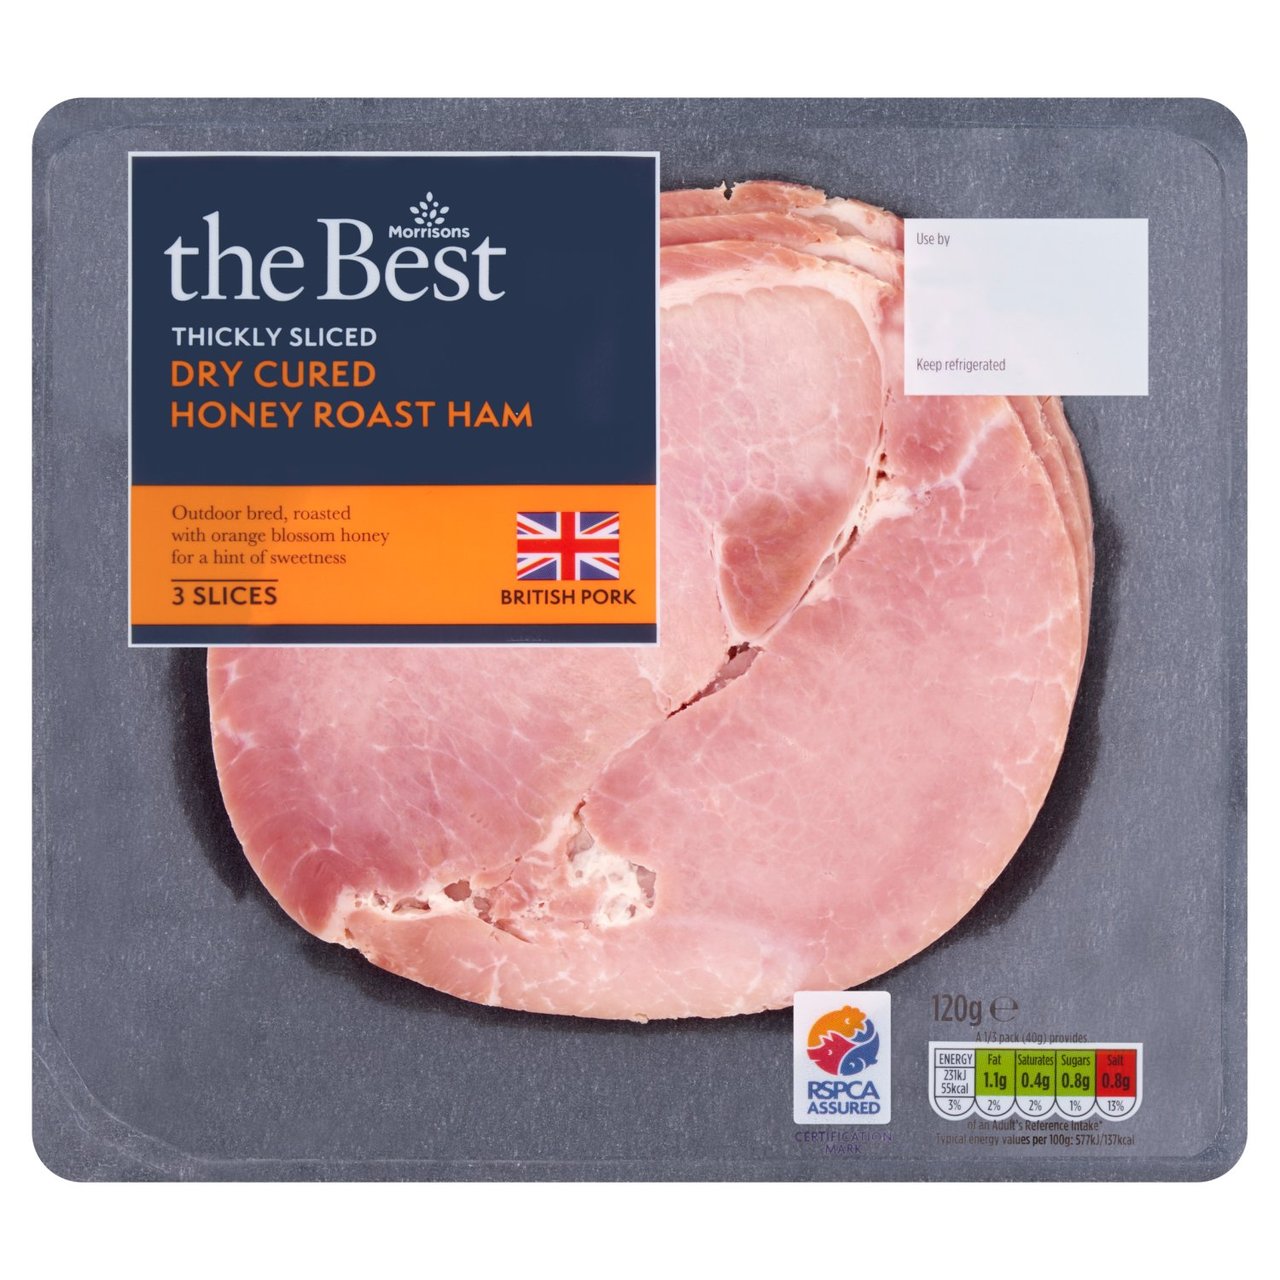 Morrisons The Best Thickly Sliced Dry Cured Honey Roast Ham